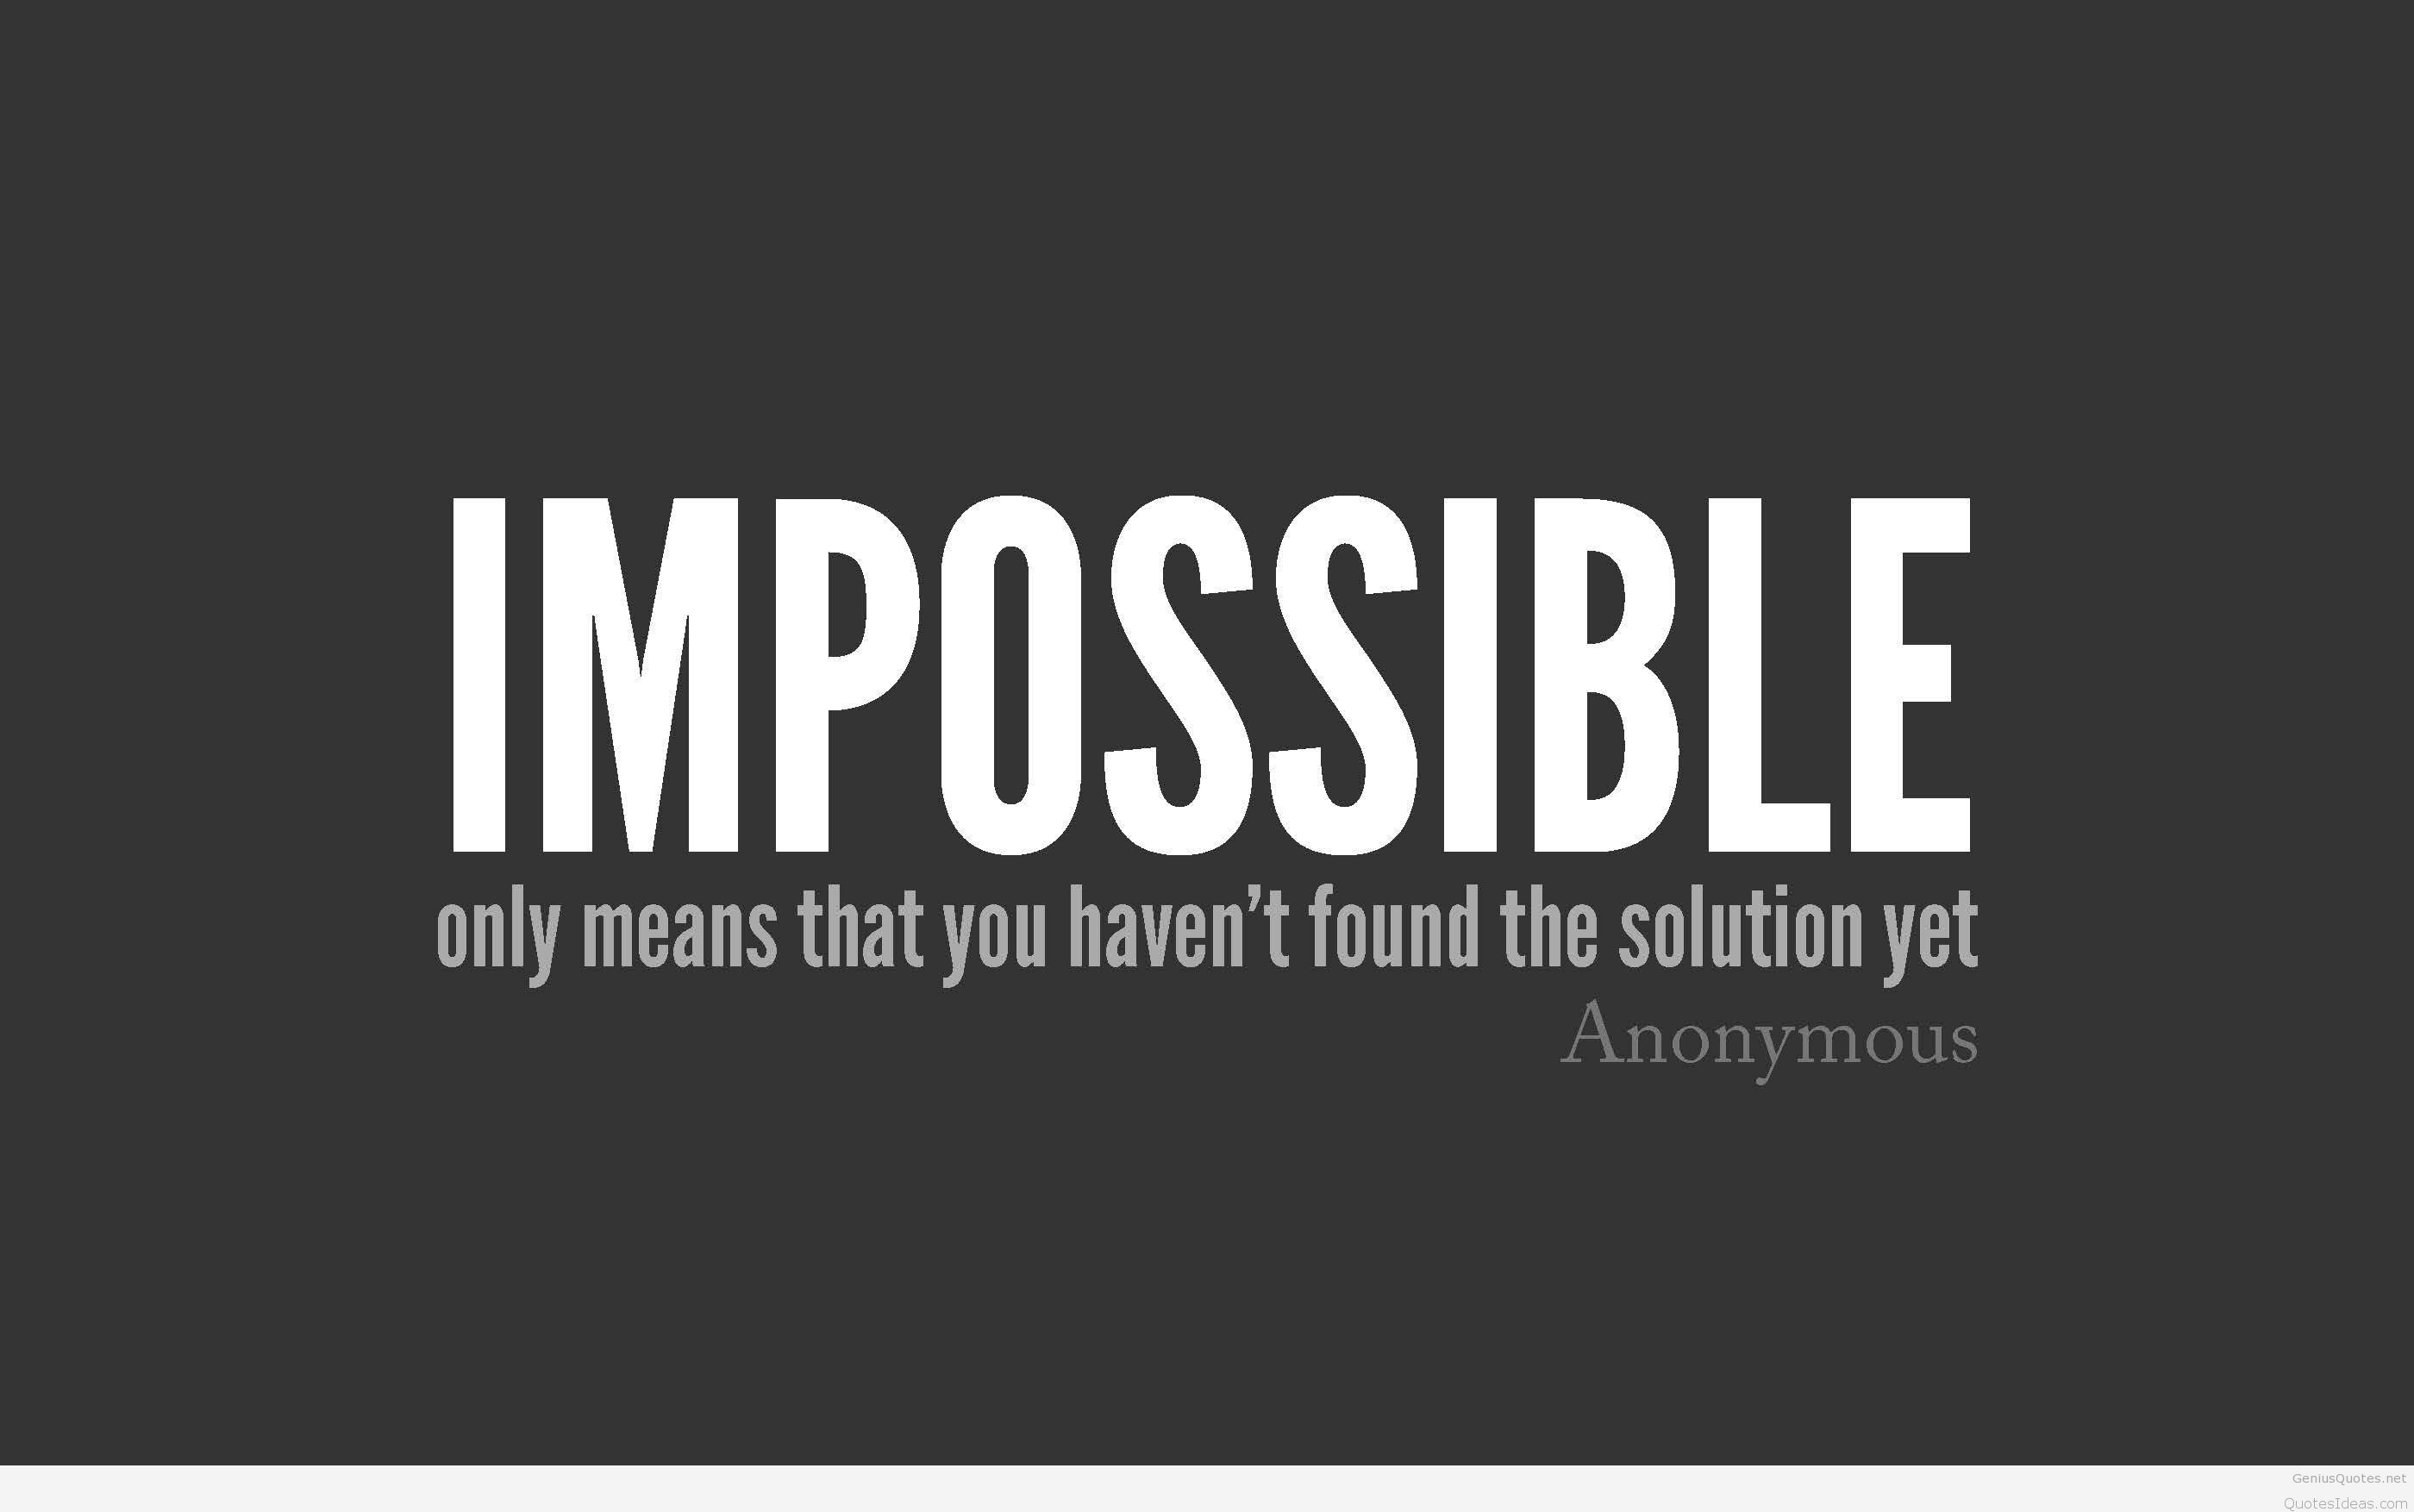 Wallpaper Business Impossible Quote Hd - Graphic Design , HD Wallpaper & Backgrounds